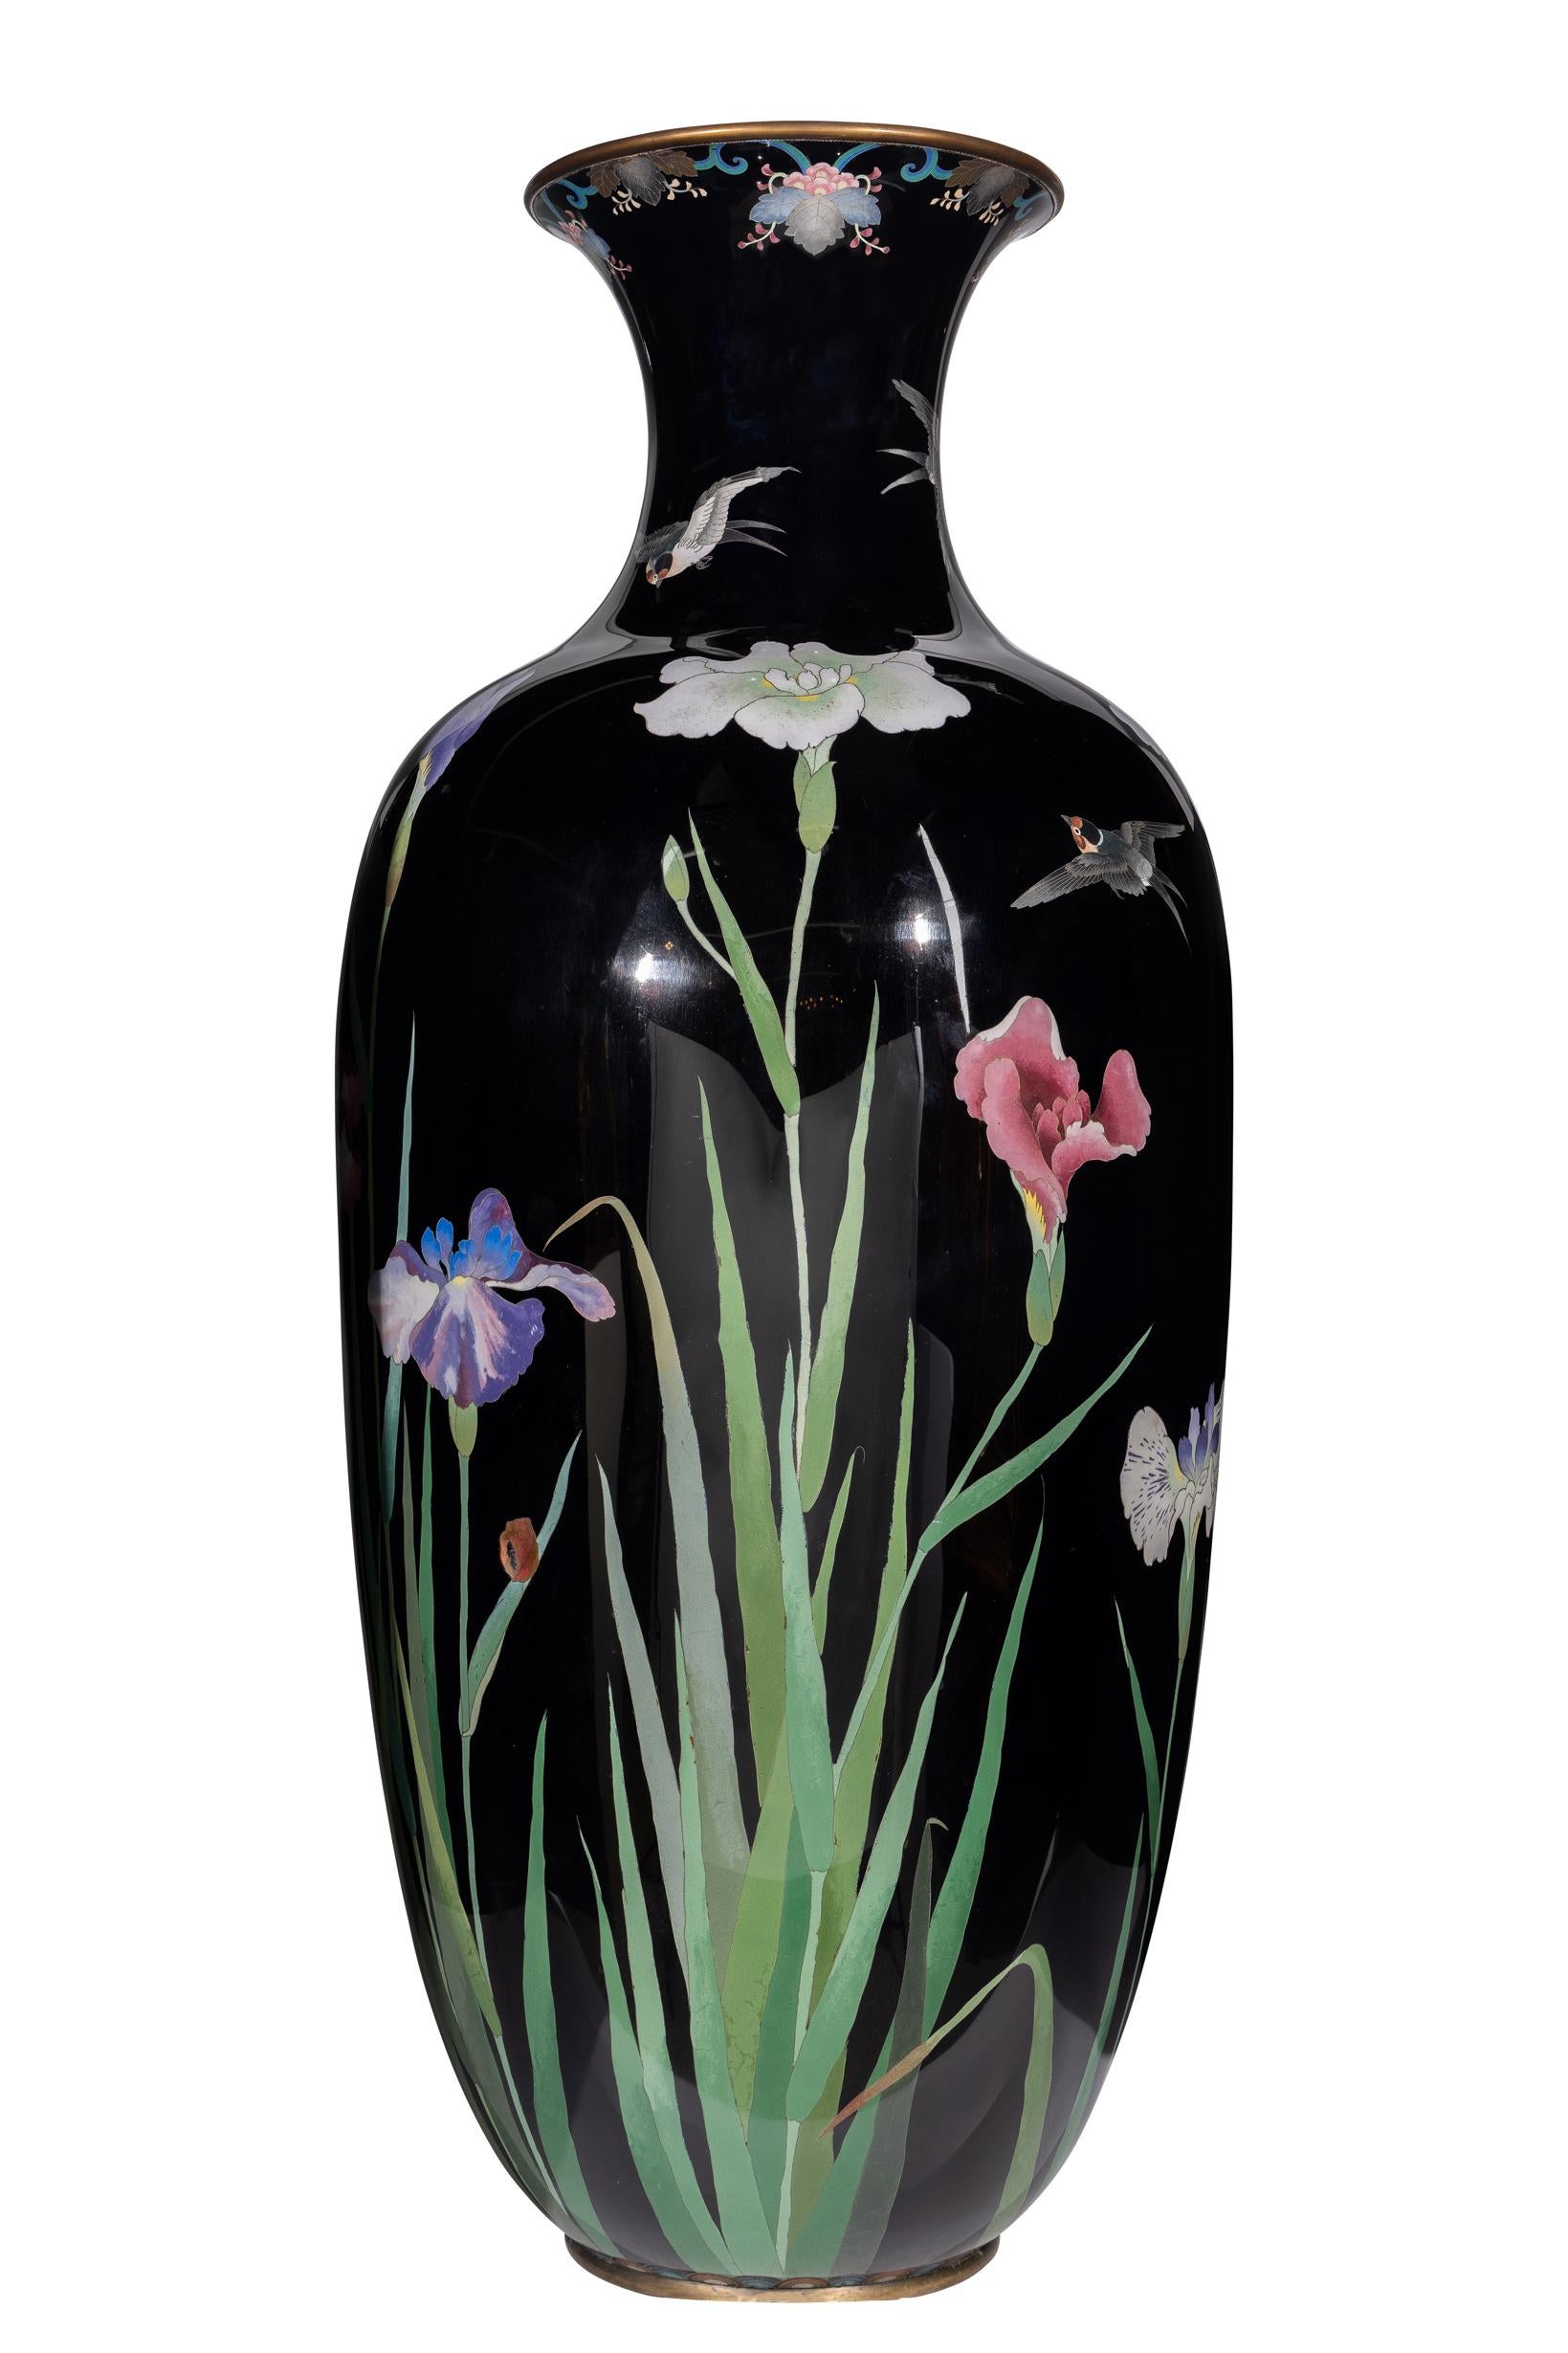 Palace-Sized Japanese Cloisonne Enamel Vase Adorned with Irises and Sparrows For Sale 1